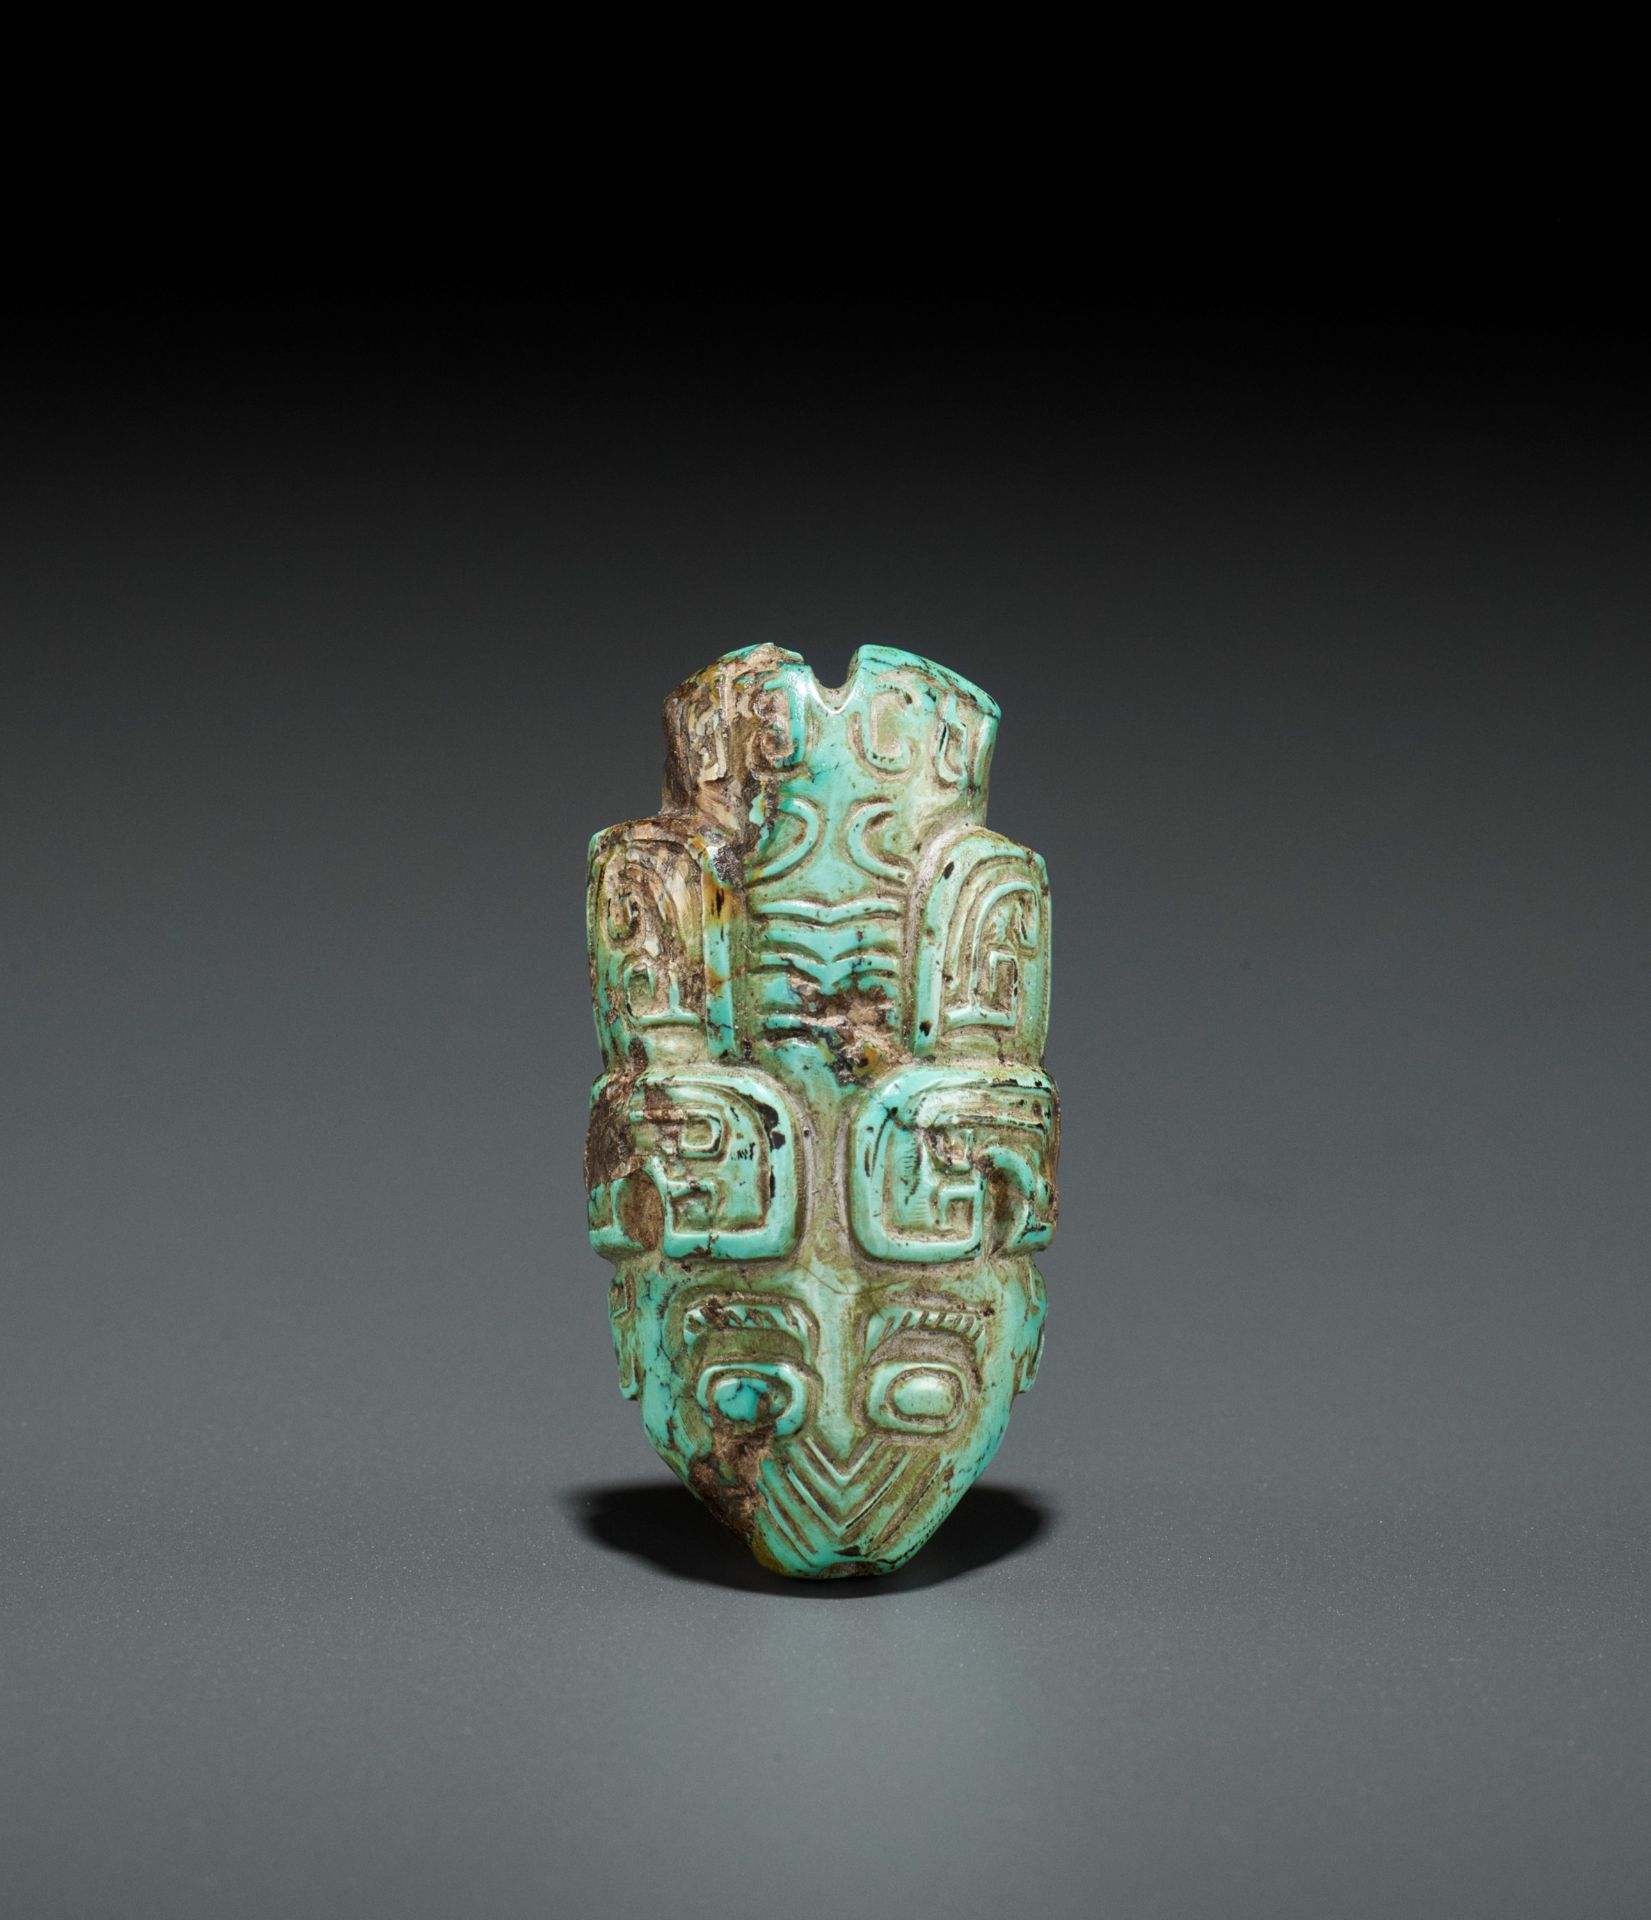 A TURQUOISE BEAD DEPICTING A CICADA, SHANG TO WESTERN ZHOU DYNASTY